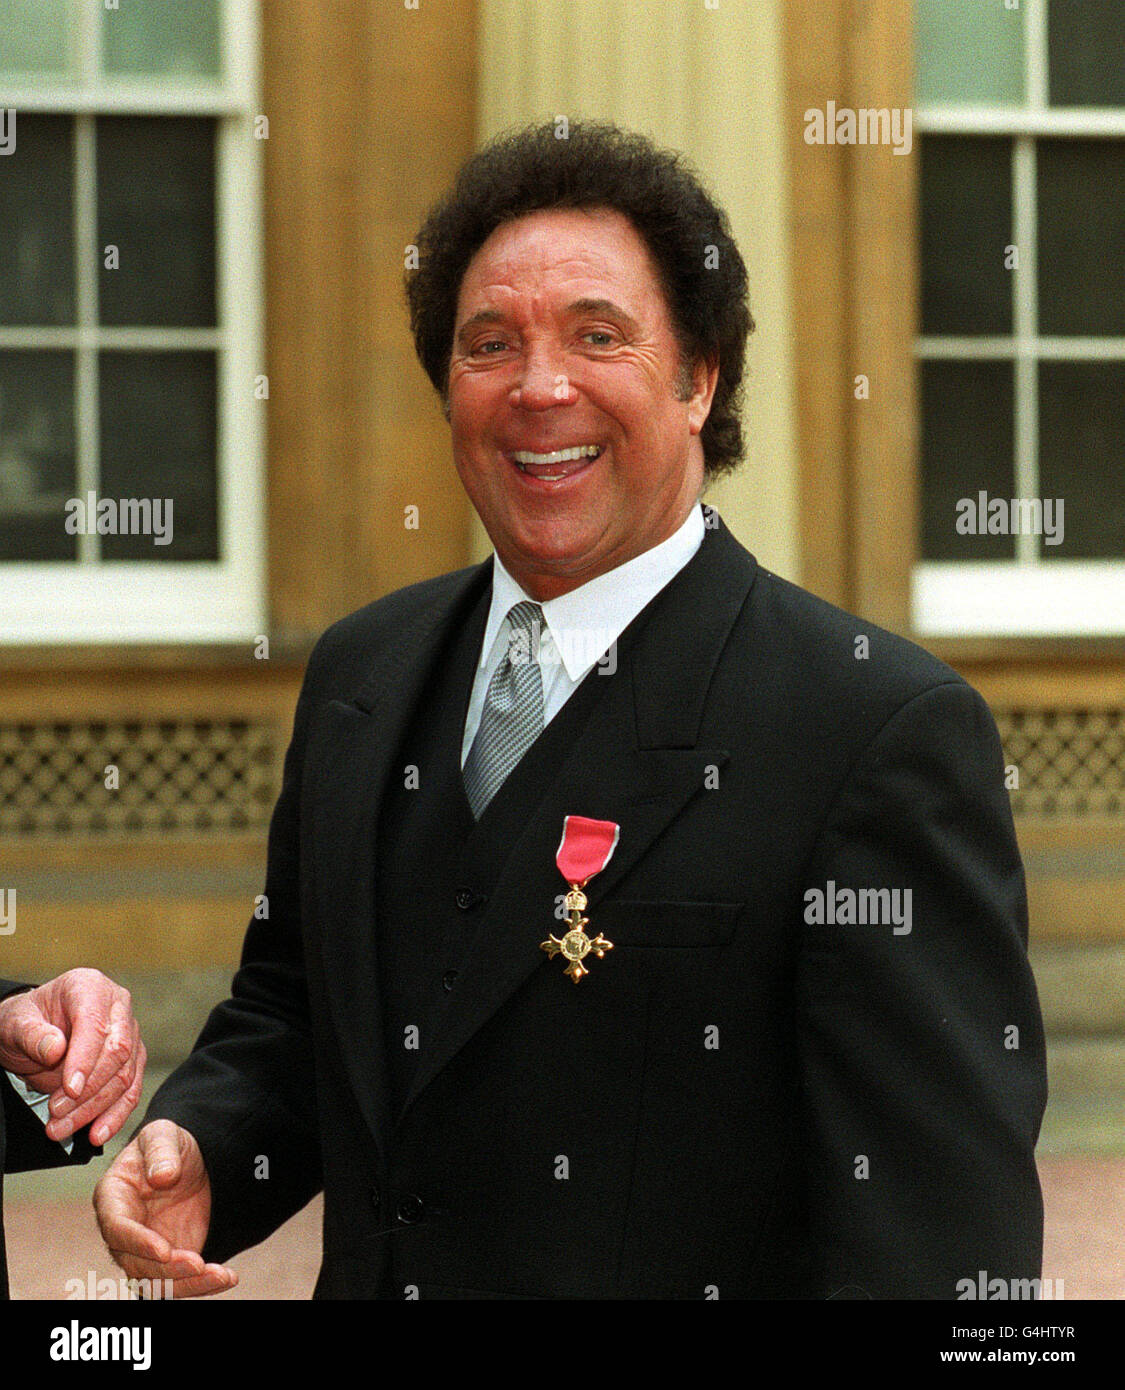 Welsh singer Tom Jones at Buckingham Palace in London after he received an OBE (Order of the British Empire) from the Queen. Stock Photo